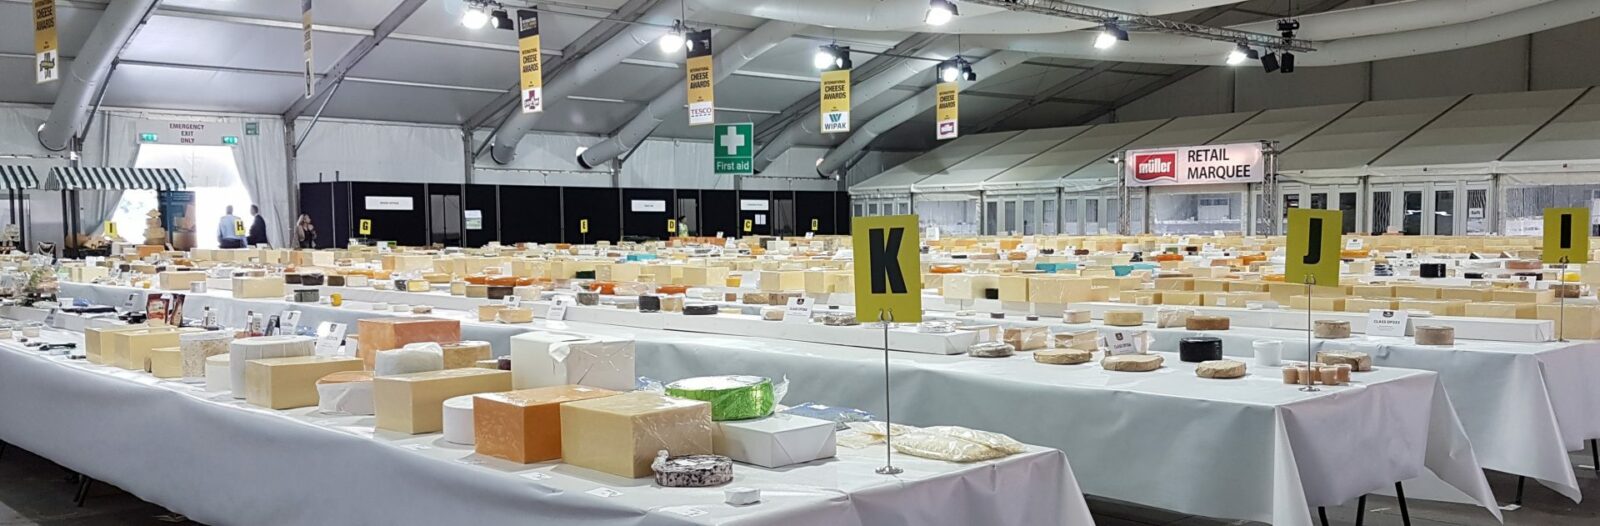 Image from international cheese awards 2017